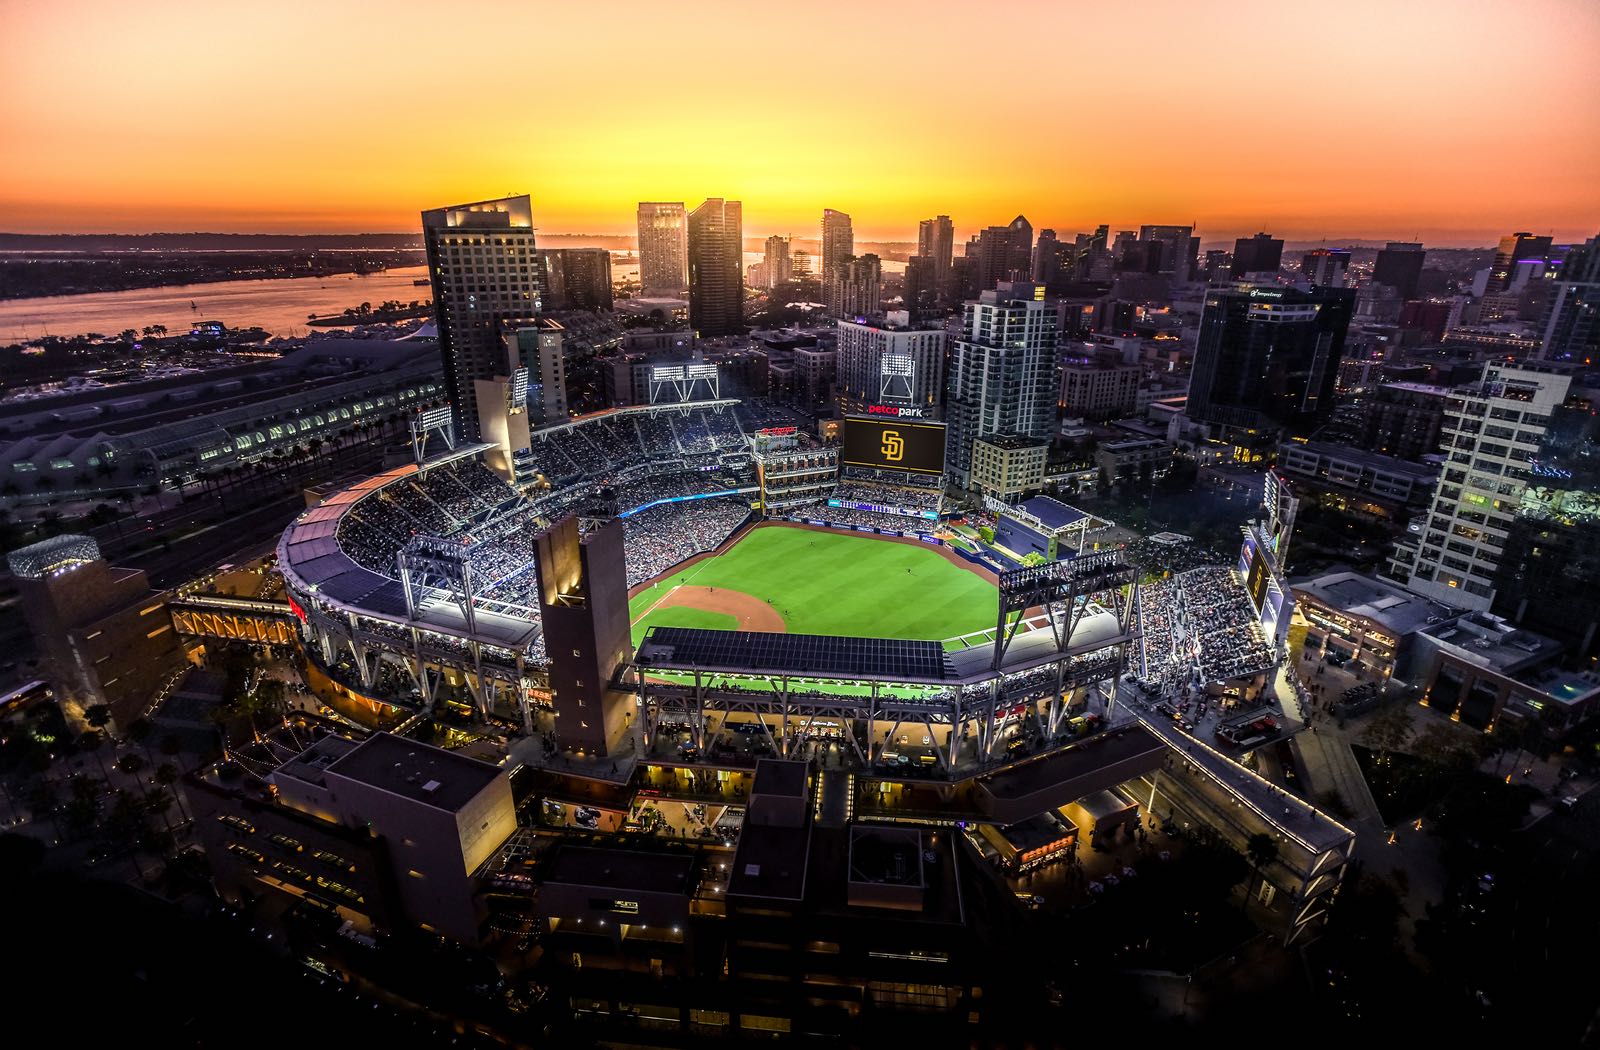 Catch the Holiday Bowl at its new home Petco Park